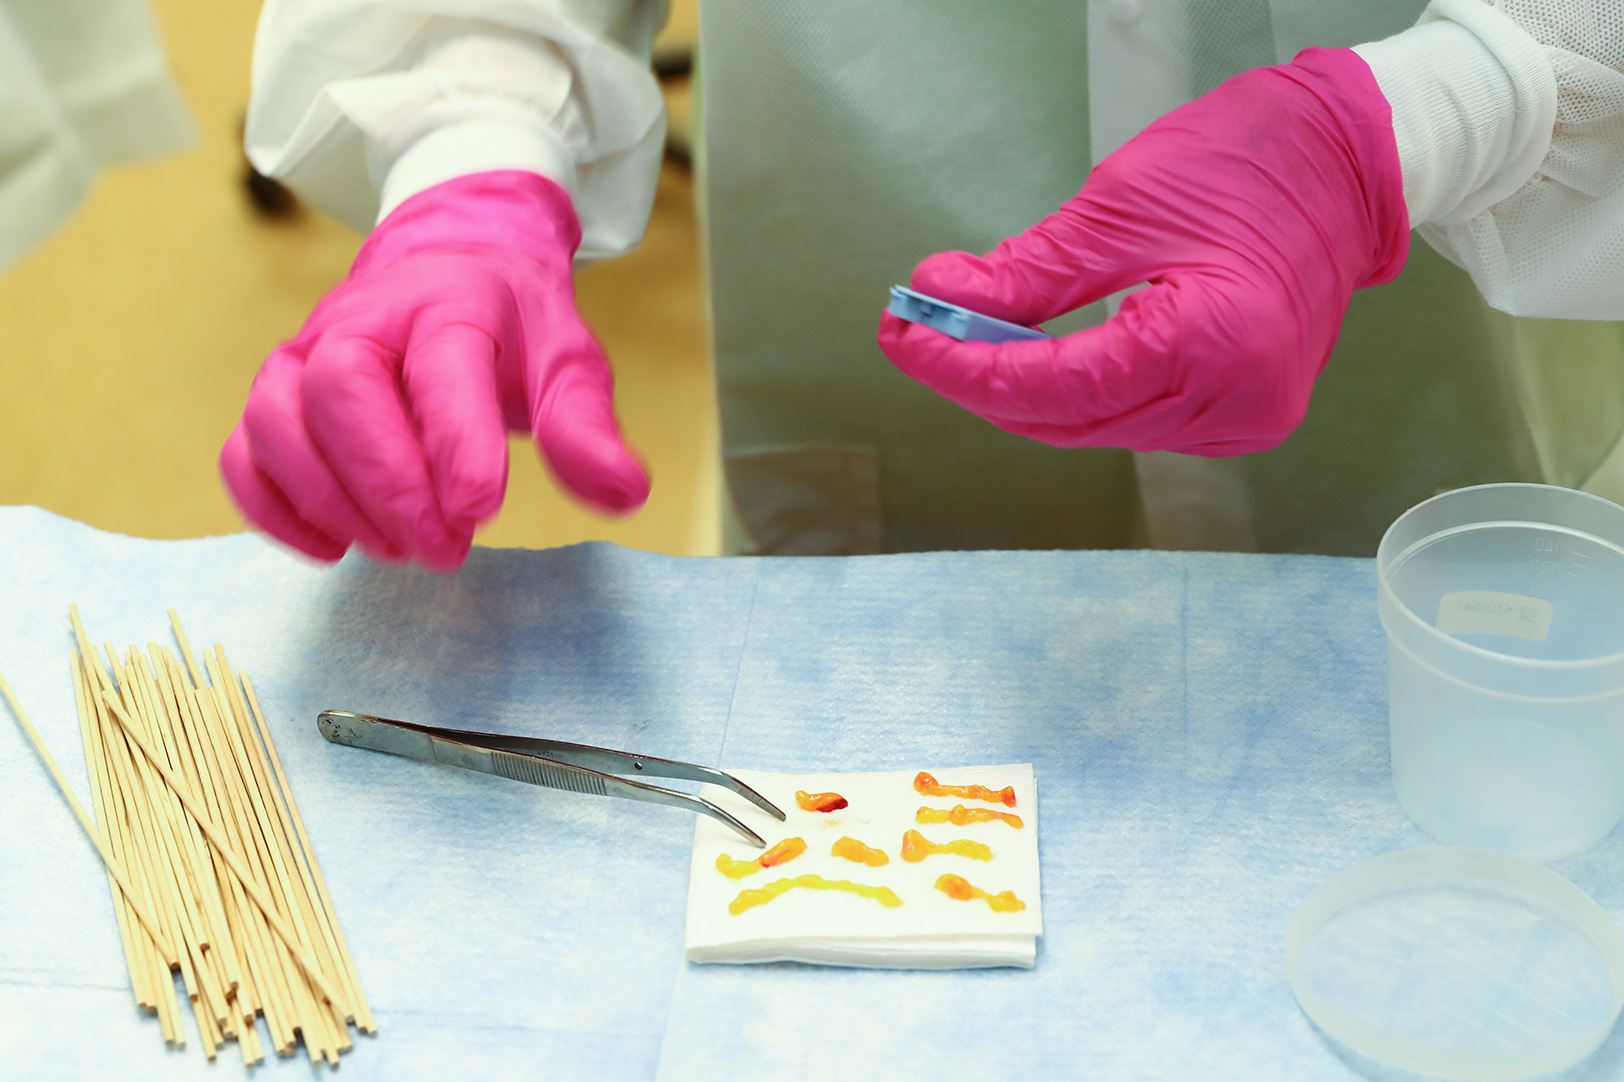 One researcher working with human tissue samples in a lab.